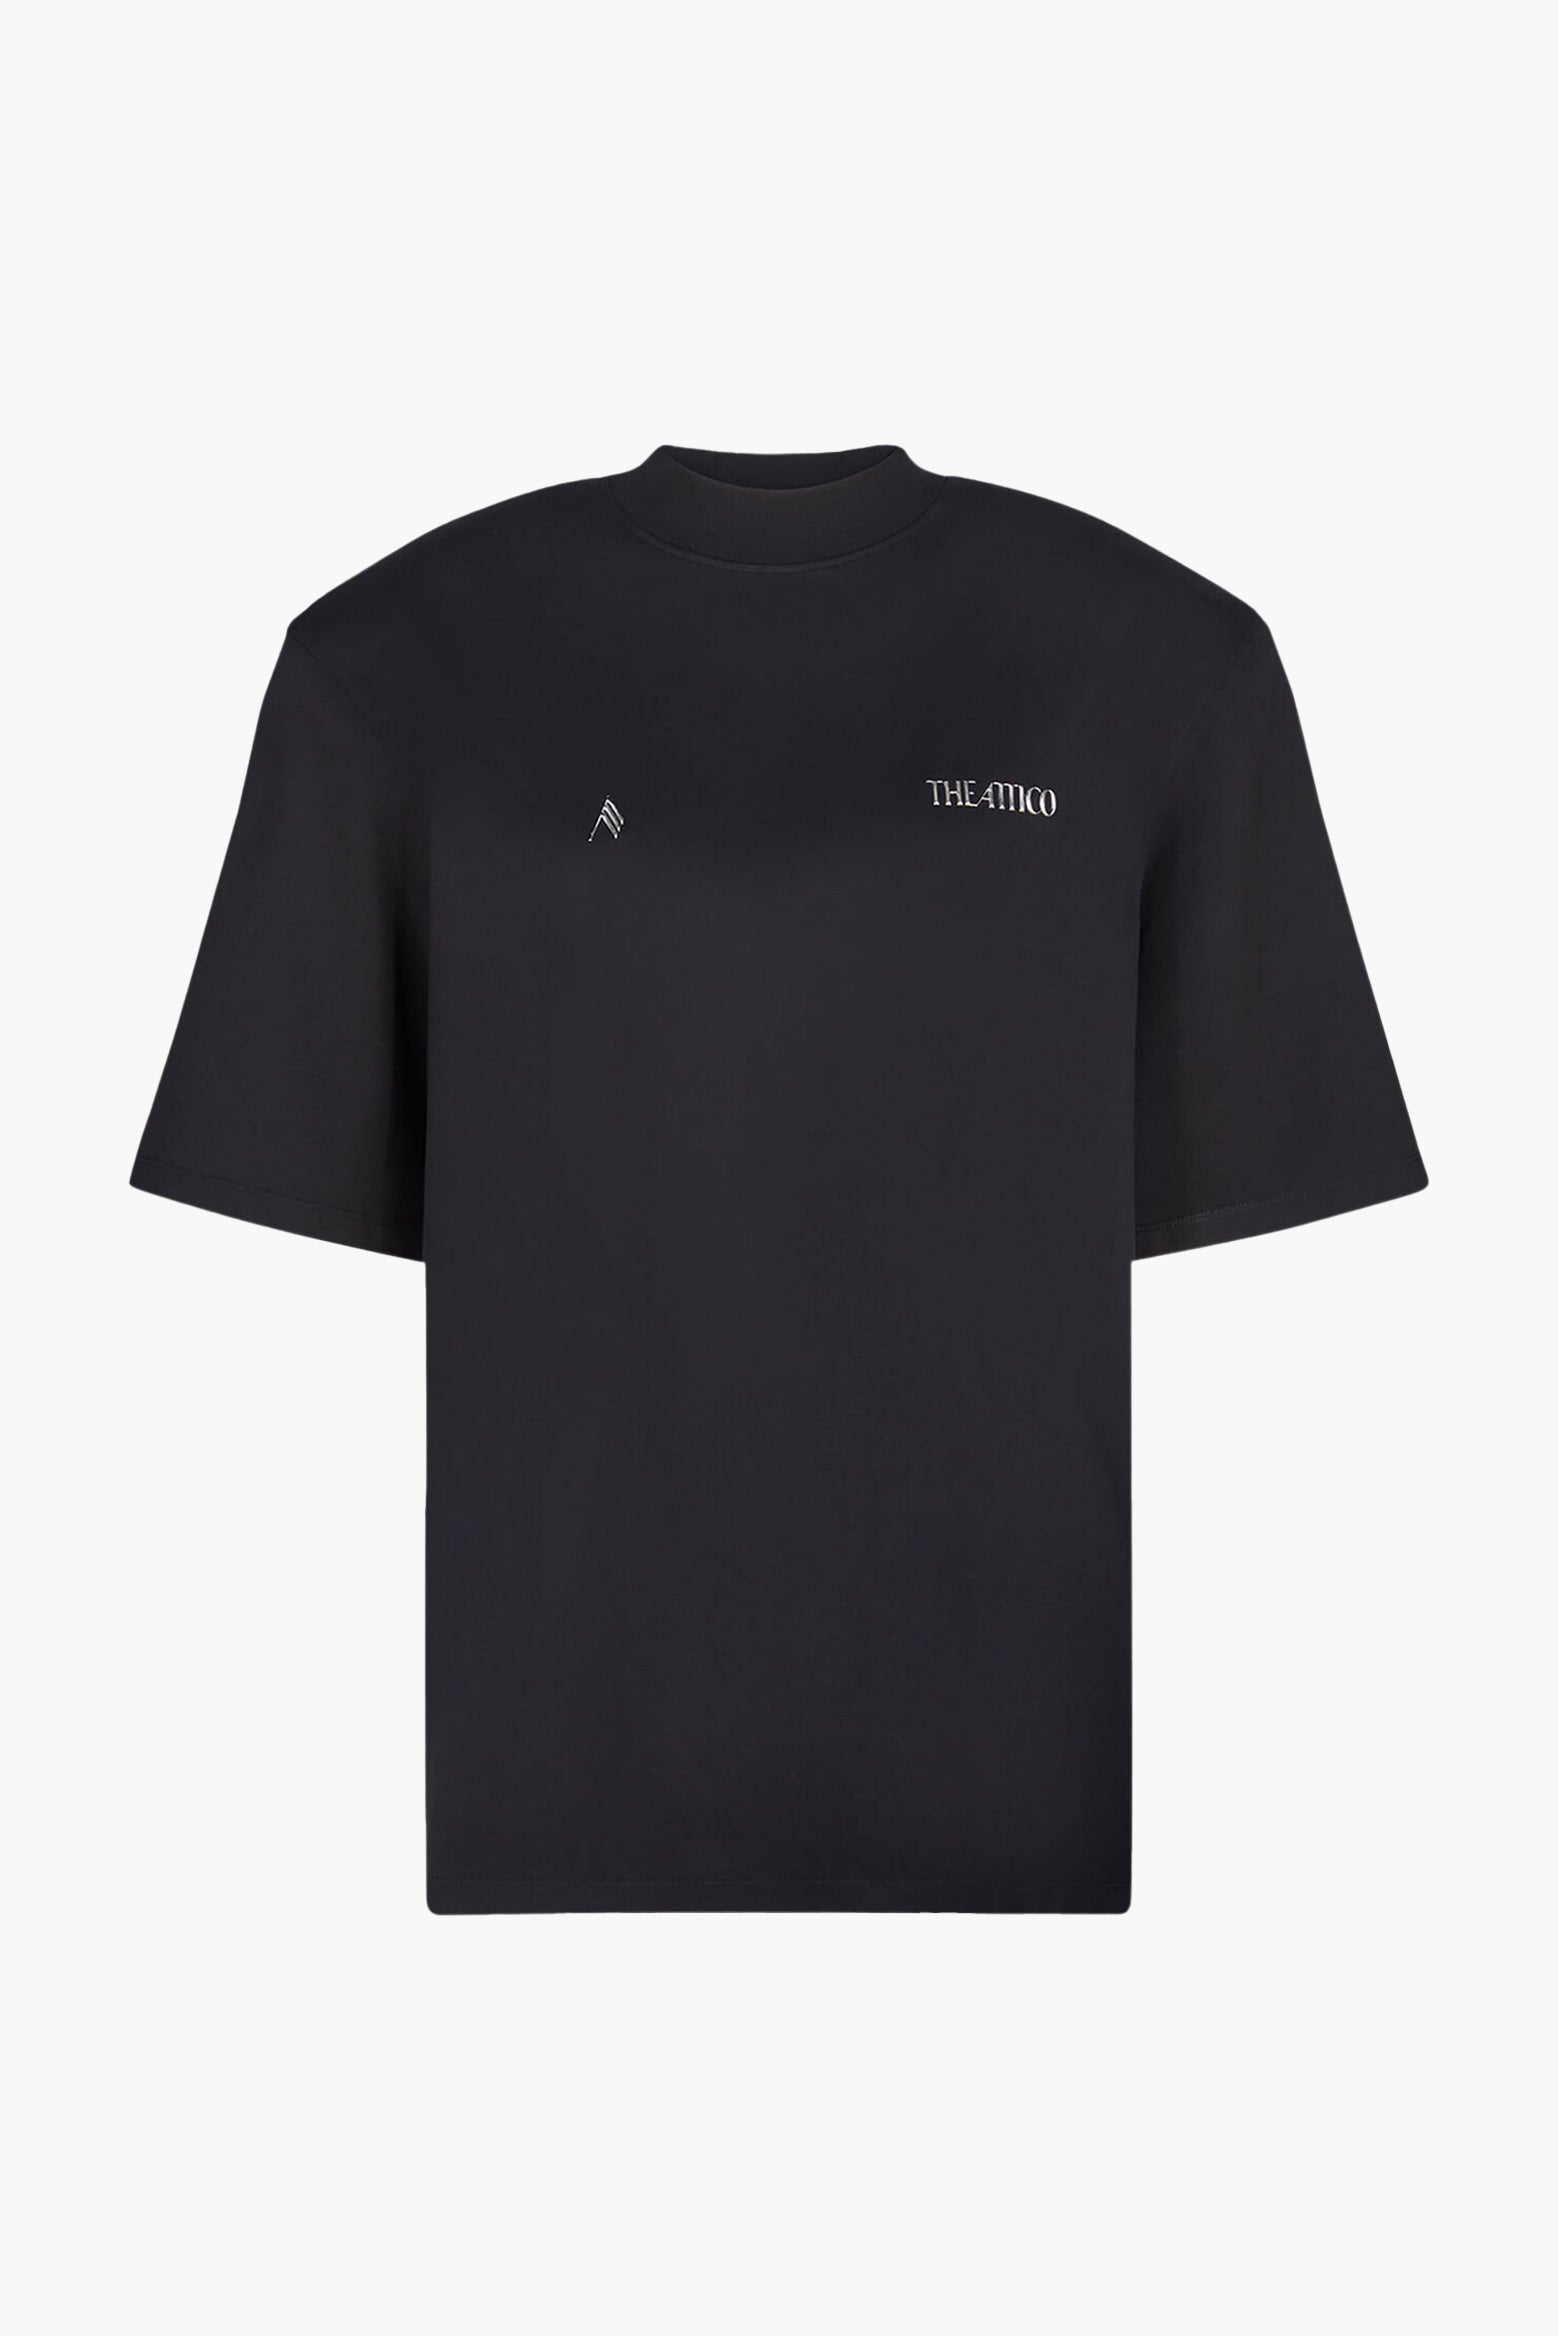 The Attico Kilie T Shirt in Black available from The New Trend Australia